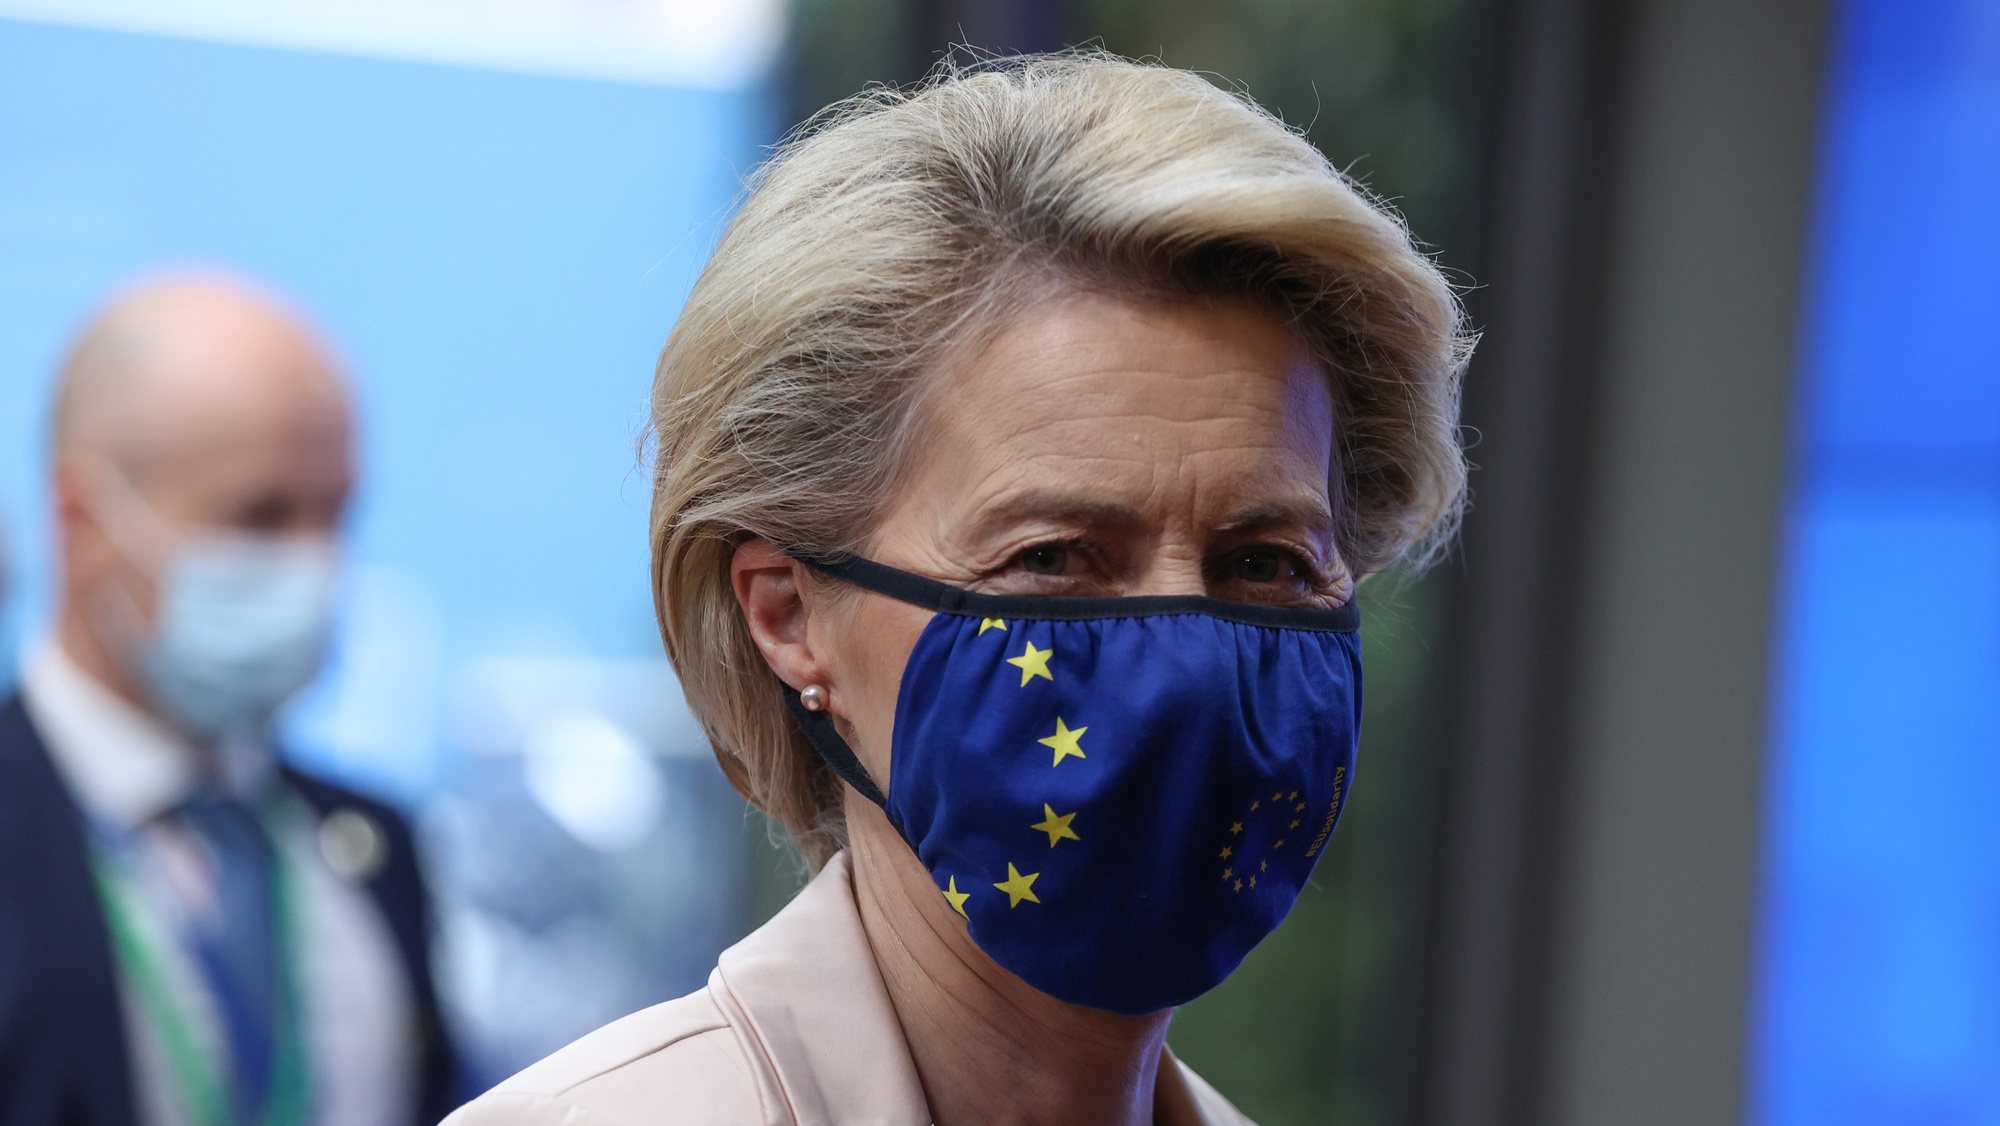 epa09300278 European Commission President Ursula von der Leyen arrives on the second day of a European Union (EU) summit at The European Council Building in Brussels, Belgium, 25 June 2021. EU leaders meet in Brussels for two days to discuss COVID-19, economic recovery, migration and external relations.  EPA/ARIS OIKONOMOU / POOL